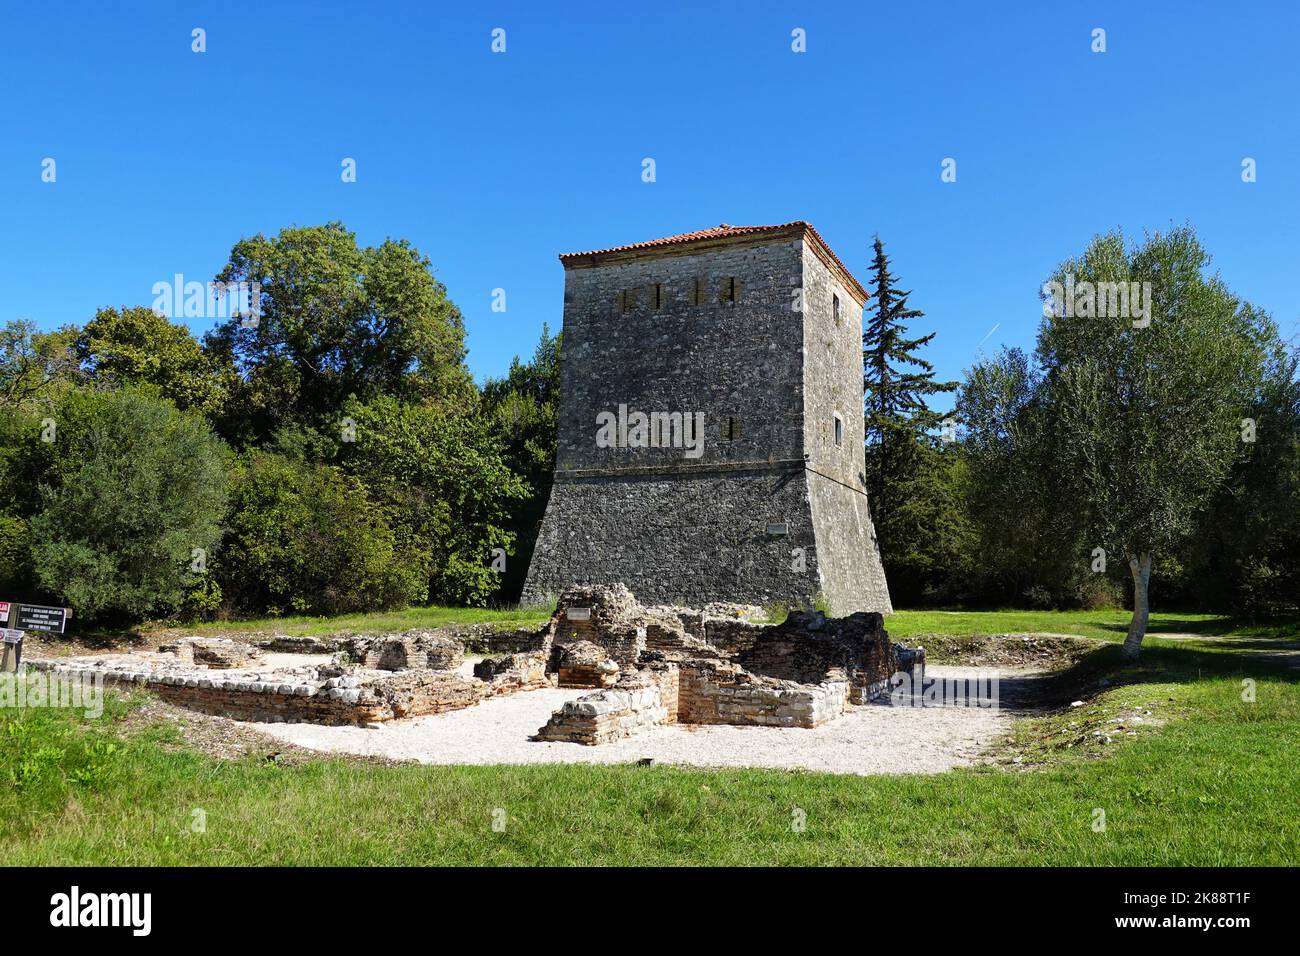 The Venetian Tower, Butrint, an ancient Greek and later Roman city and bishopric in Epirus, UNESCO World Heritage Site, Republic of Albania Stock Photo